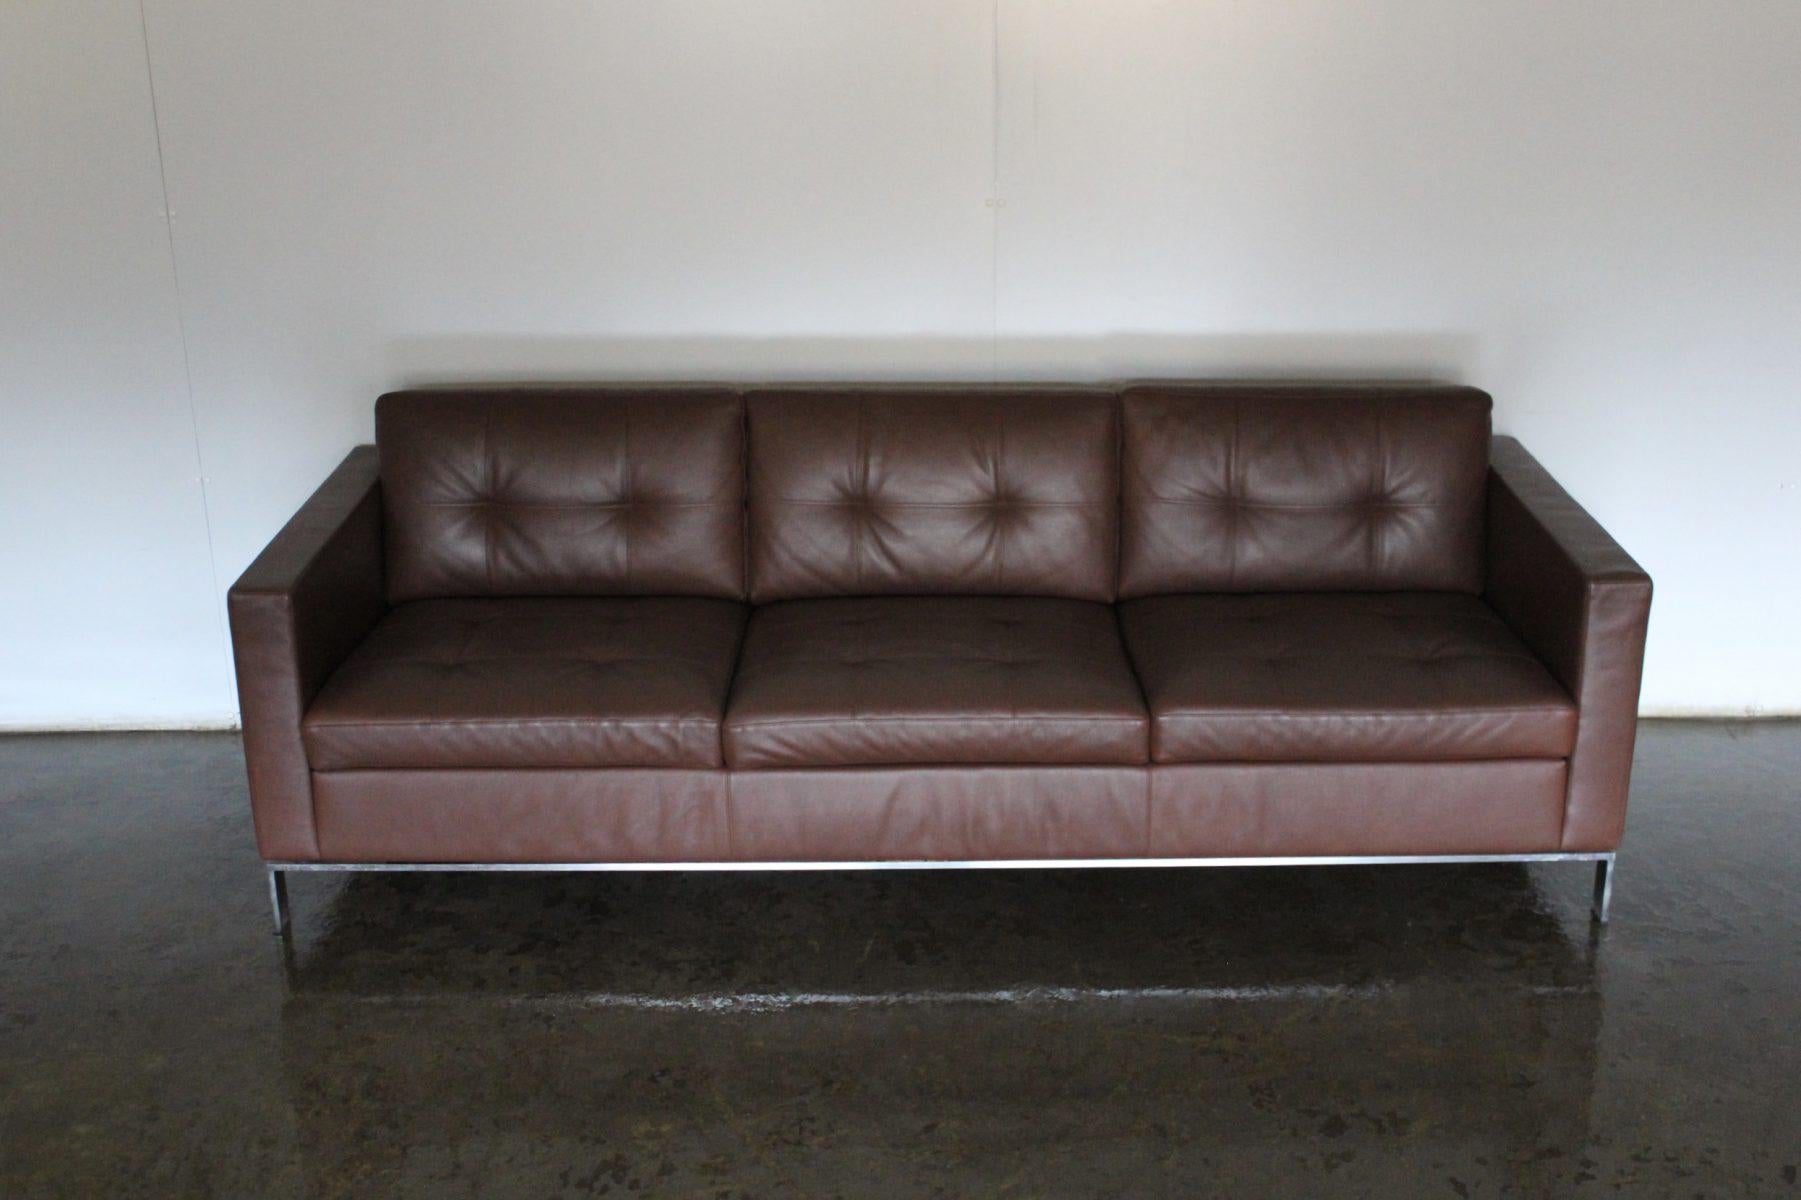 Walter Knoll “Foster 502.30” 3-Seat Sofa – In Dark Brown Leather In Good Condition For Sale In Barrowford, GB